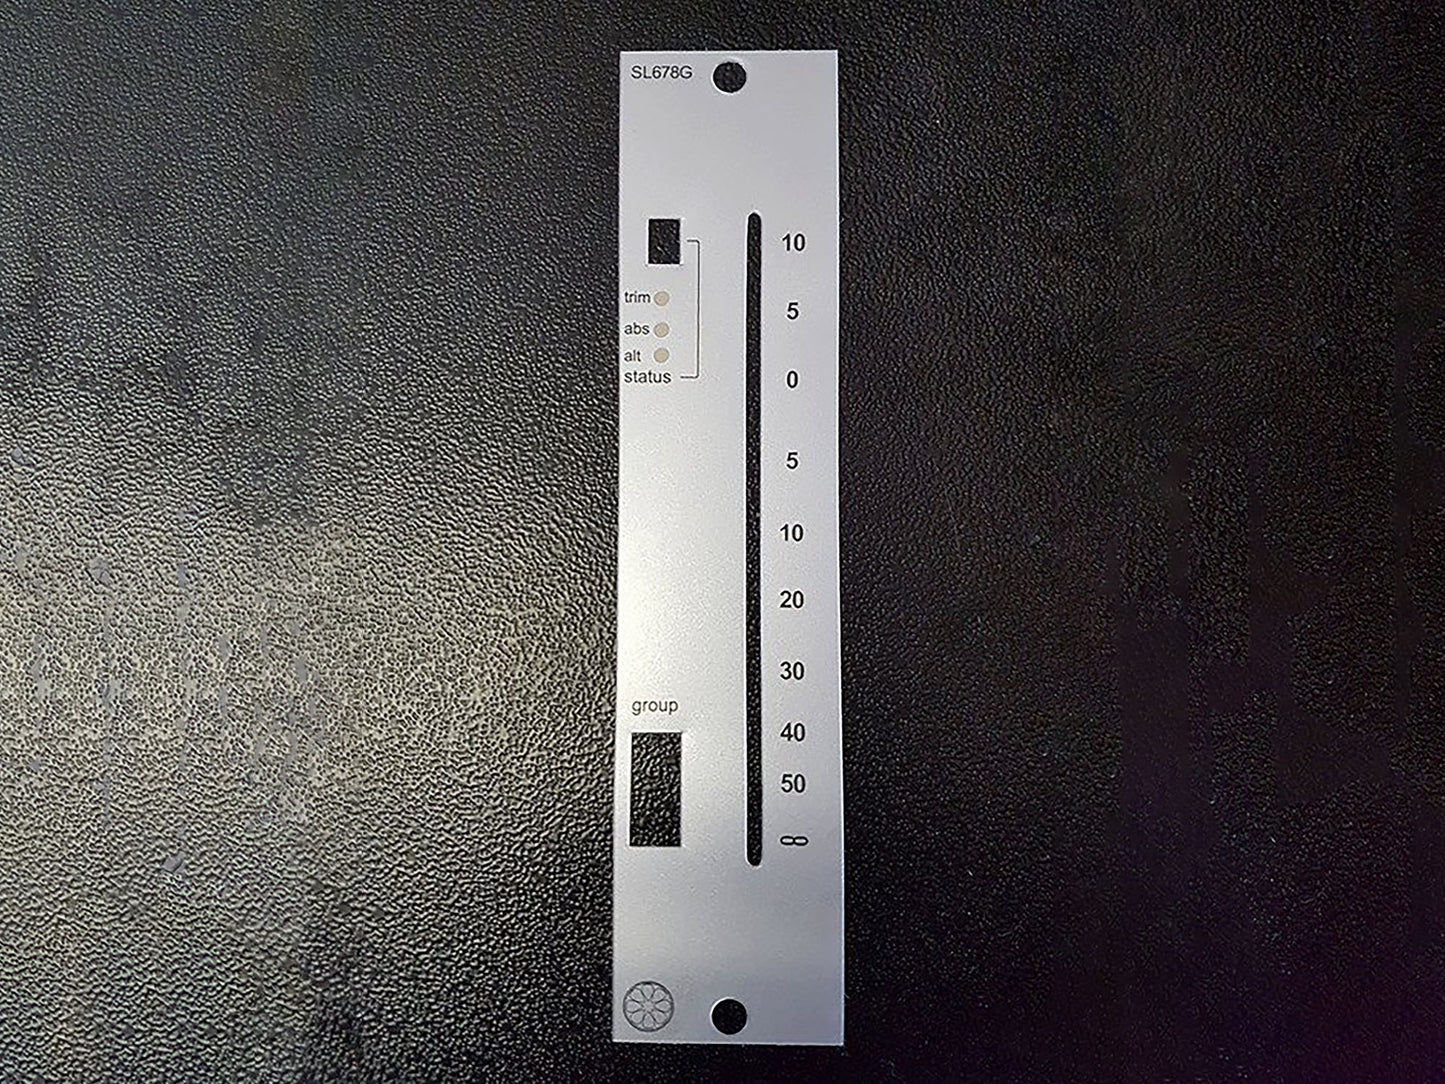 Lexan fader overlay for SSL Ultimation consoles